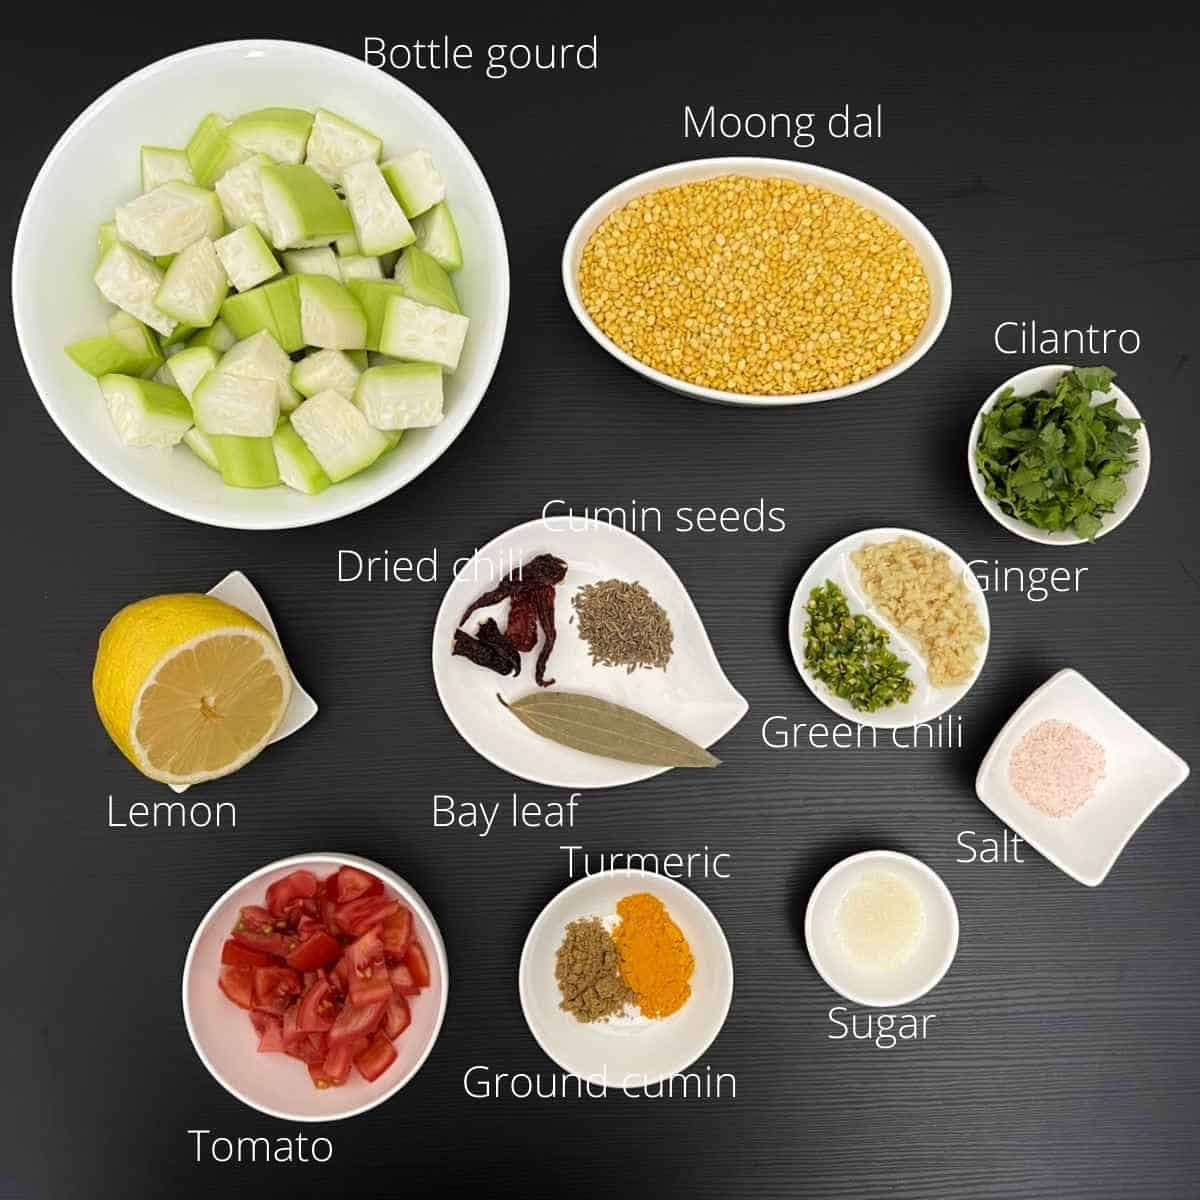 bottle gourd dal ingredients with labels.